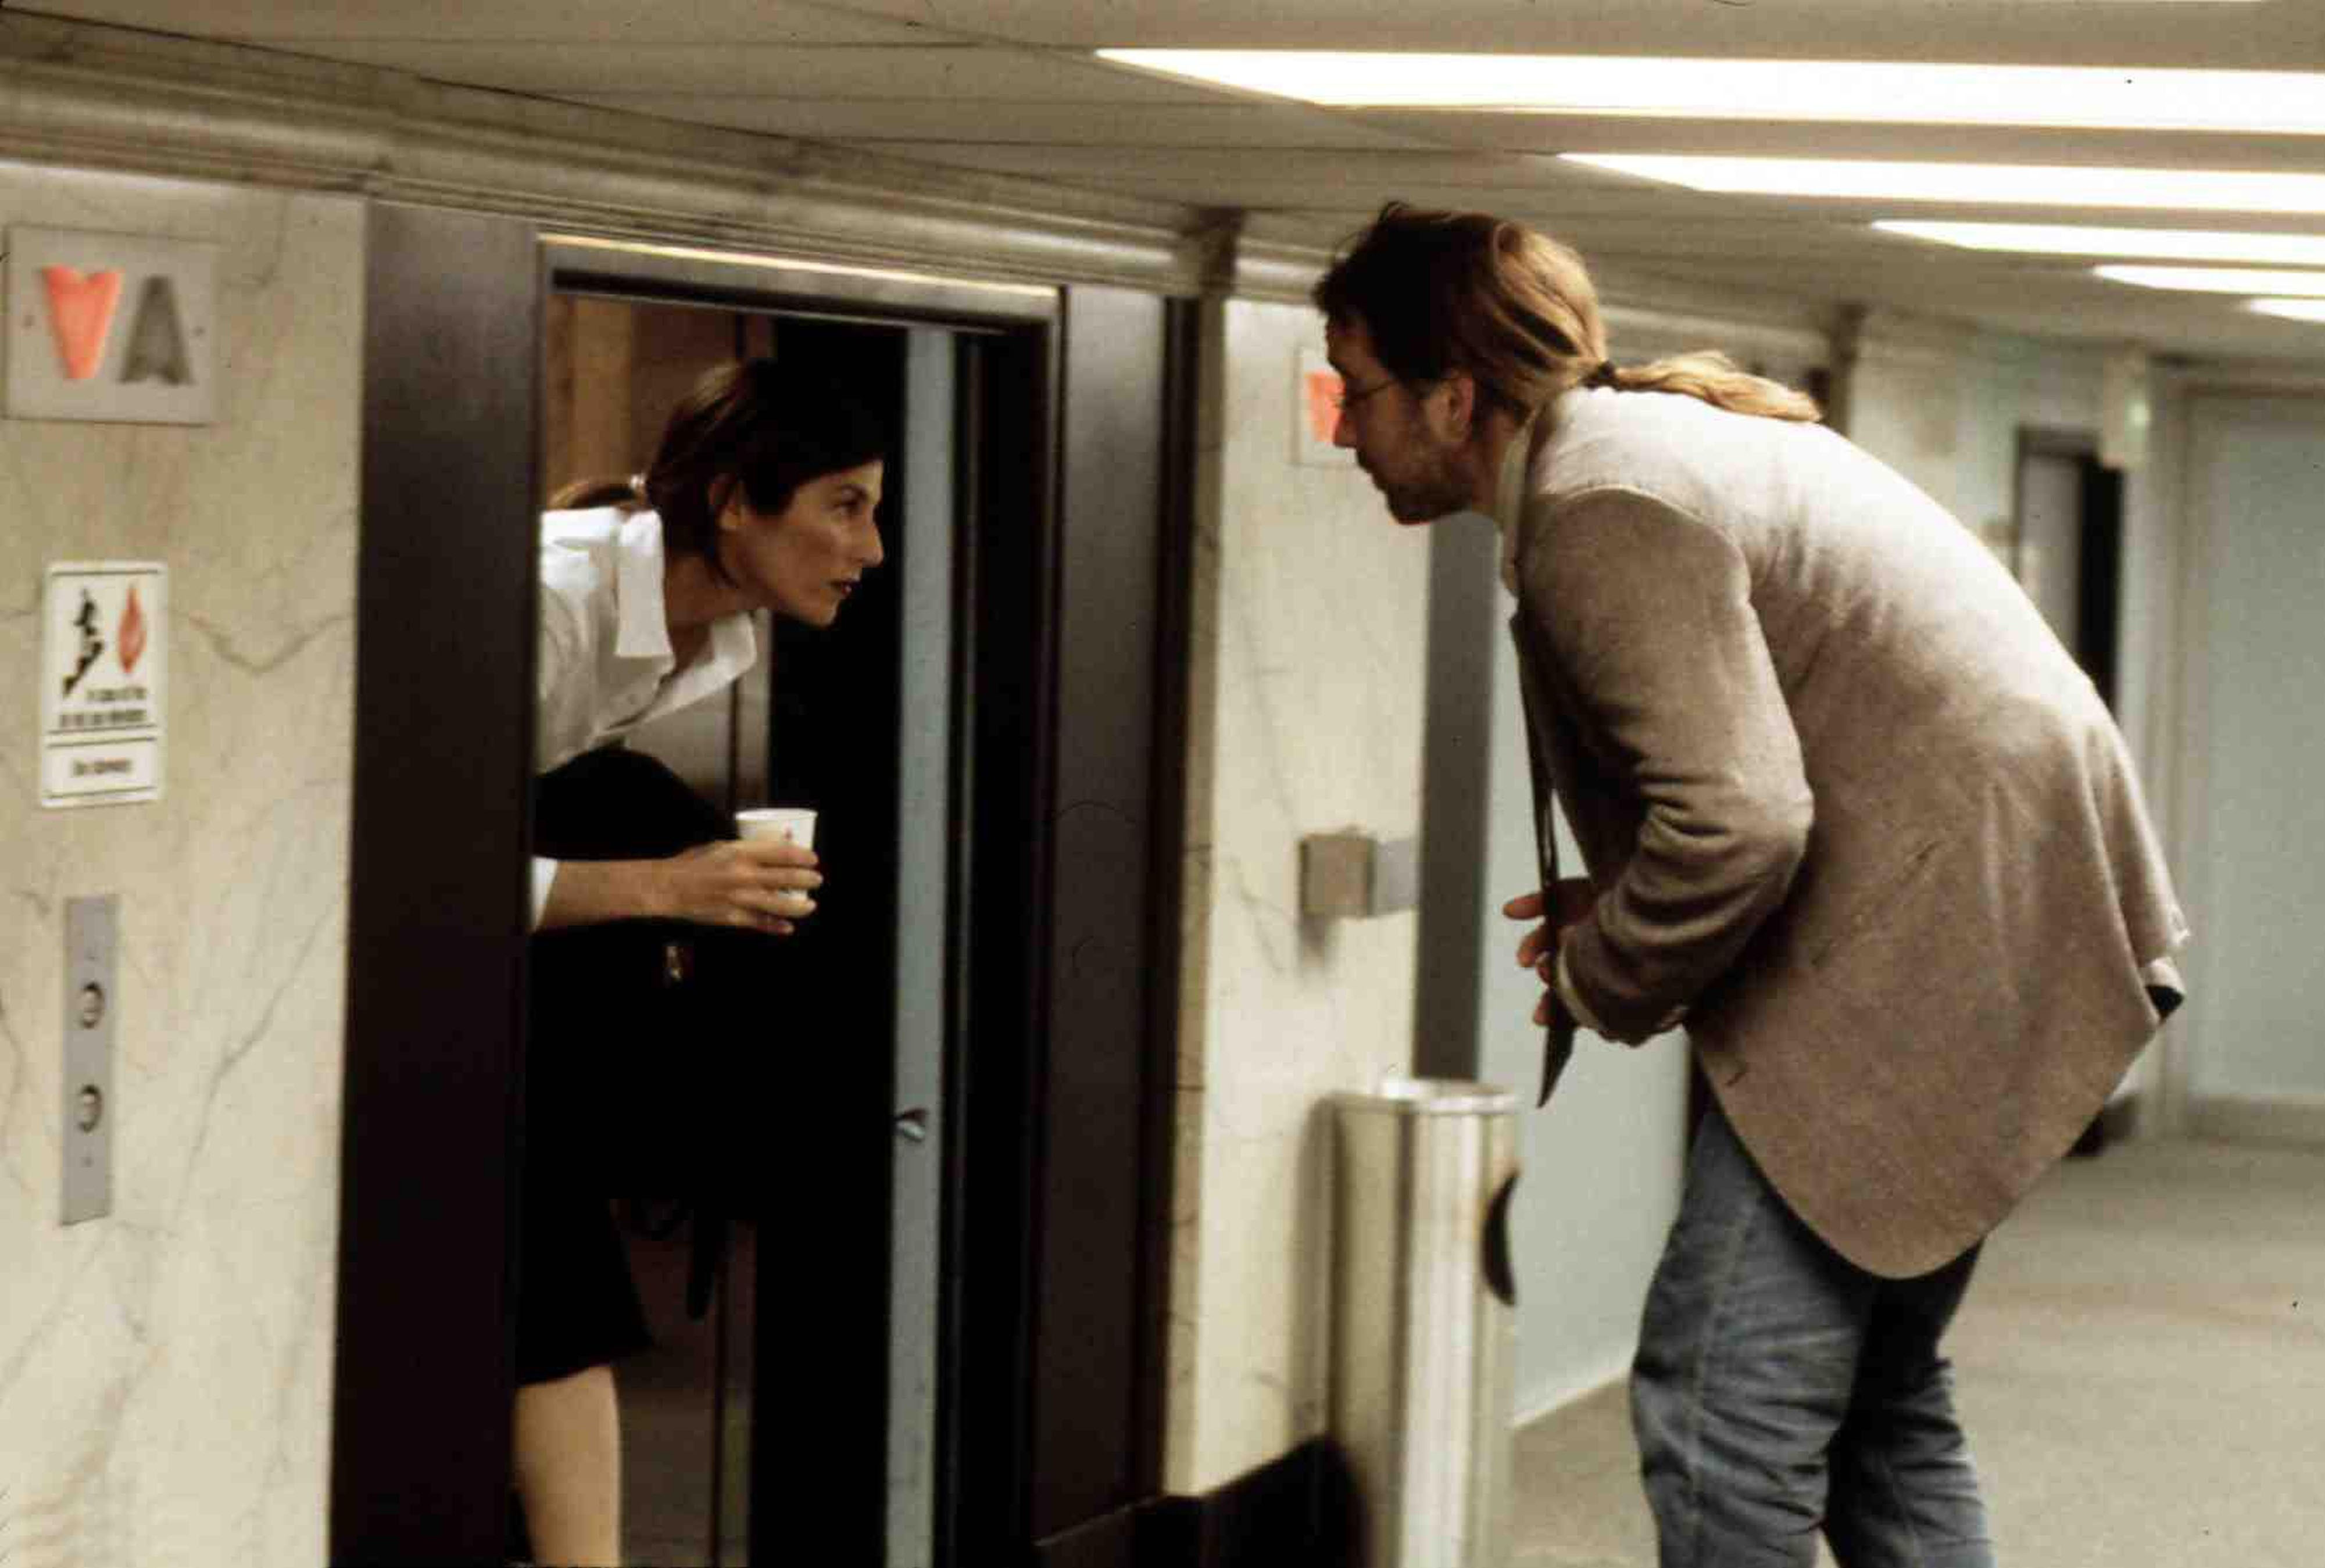 (Left to right) Catherine Keener as Maxine and John Cusack as Craig outside an elevator in a too-short hallway that requires them to squat in Being John Malkovich